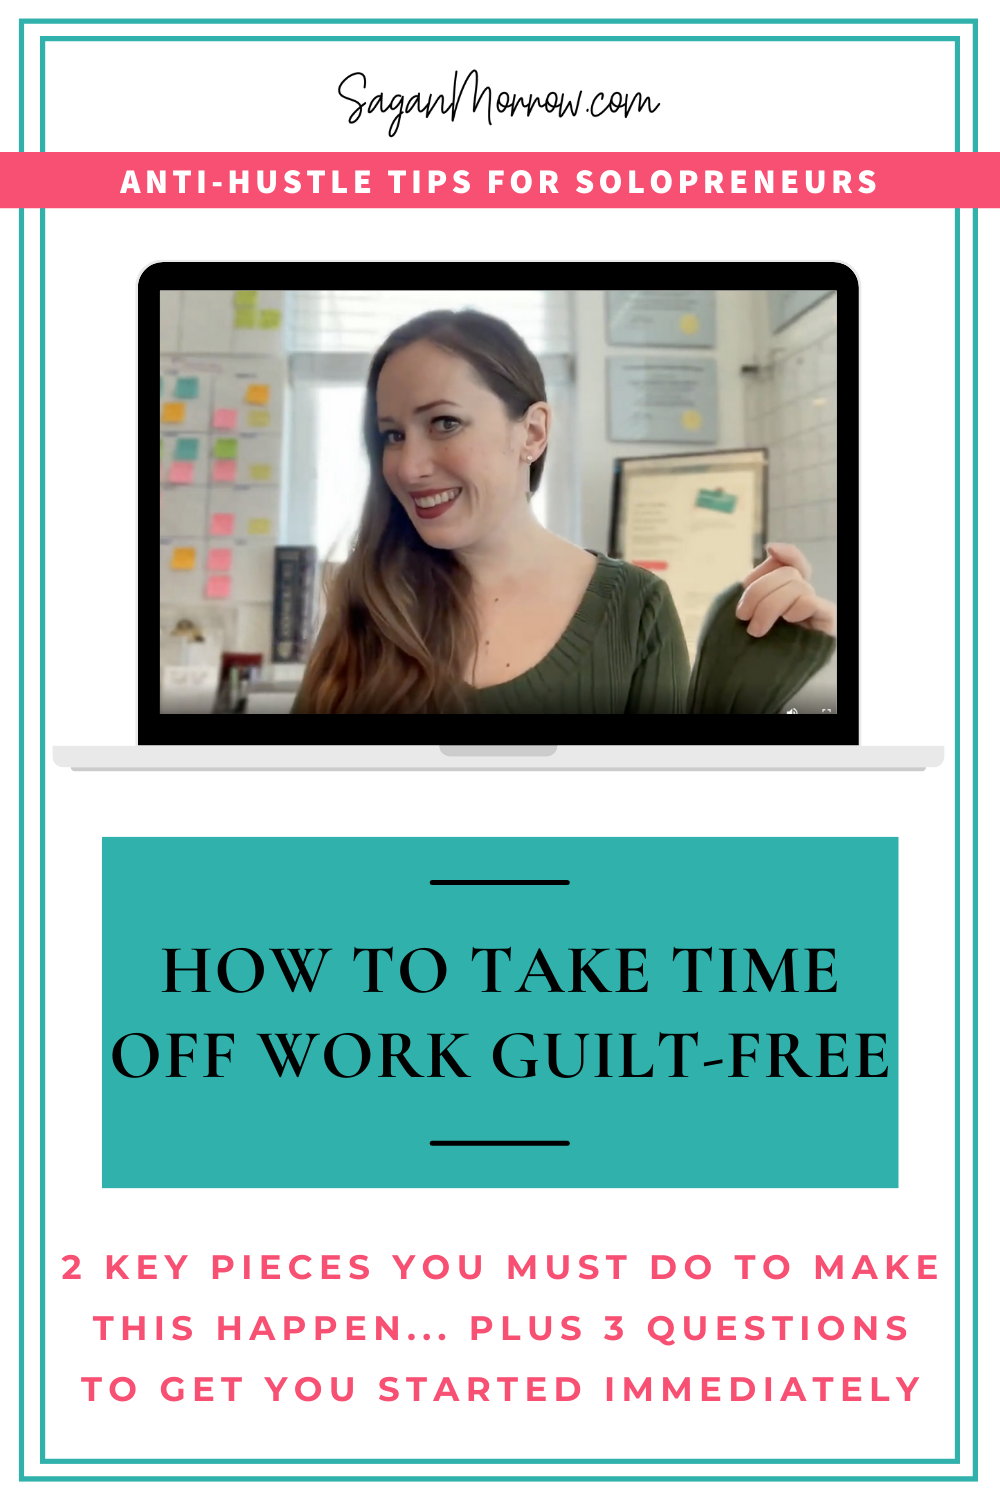 how to take time off work guilt-free for high-achieving solopreneurs